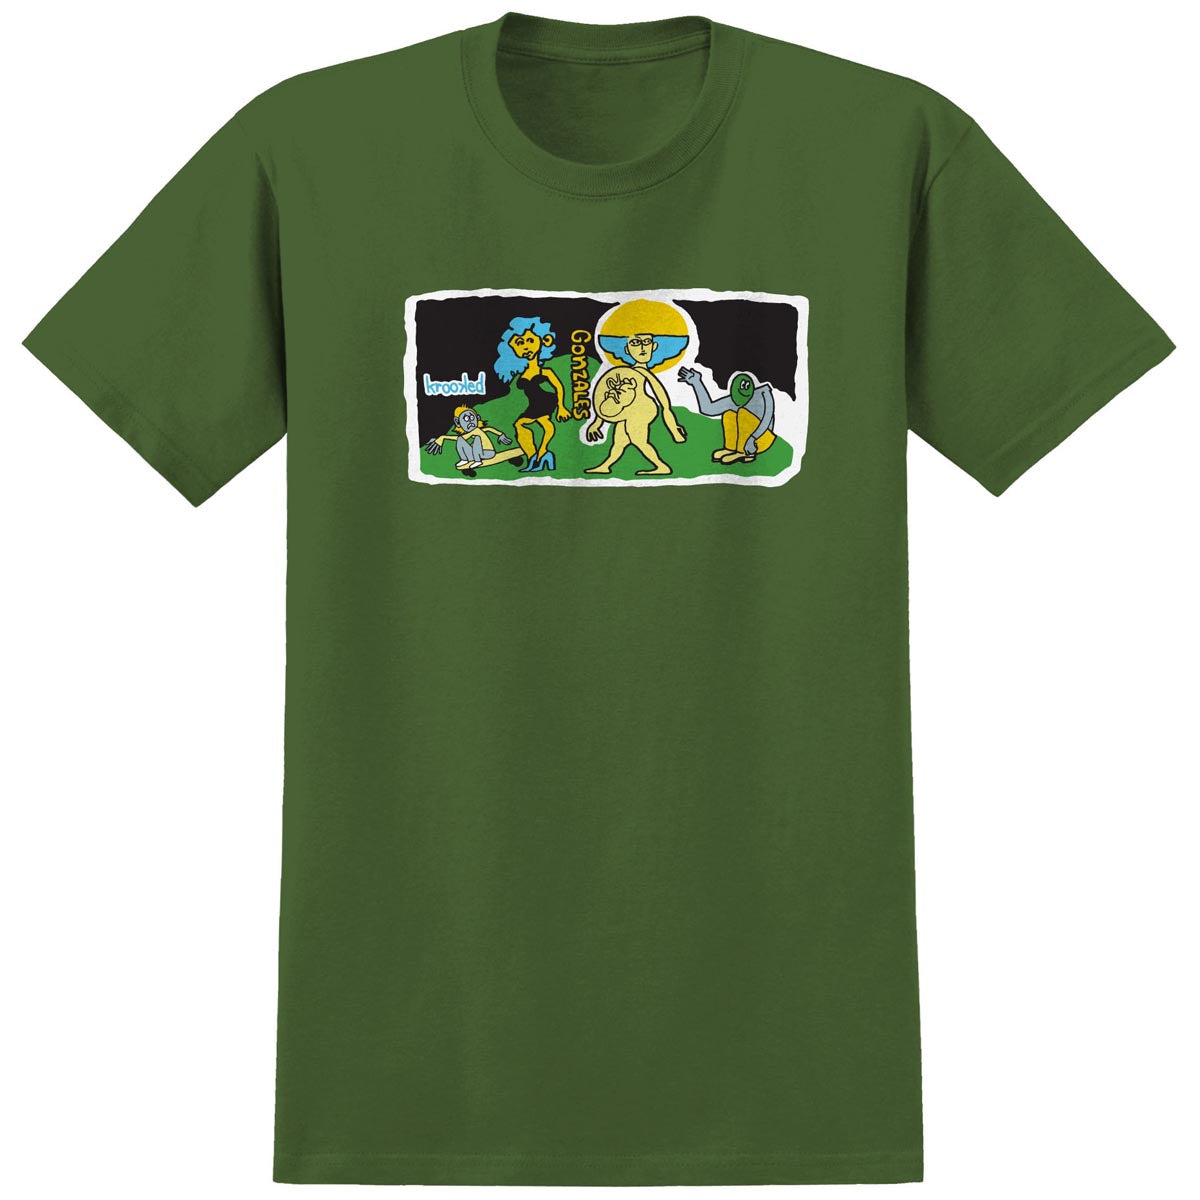 Krooked Stroll T-Shirt - Military Green image 1